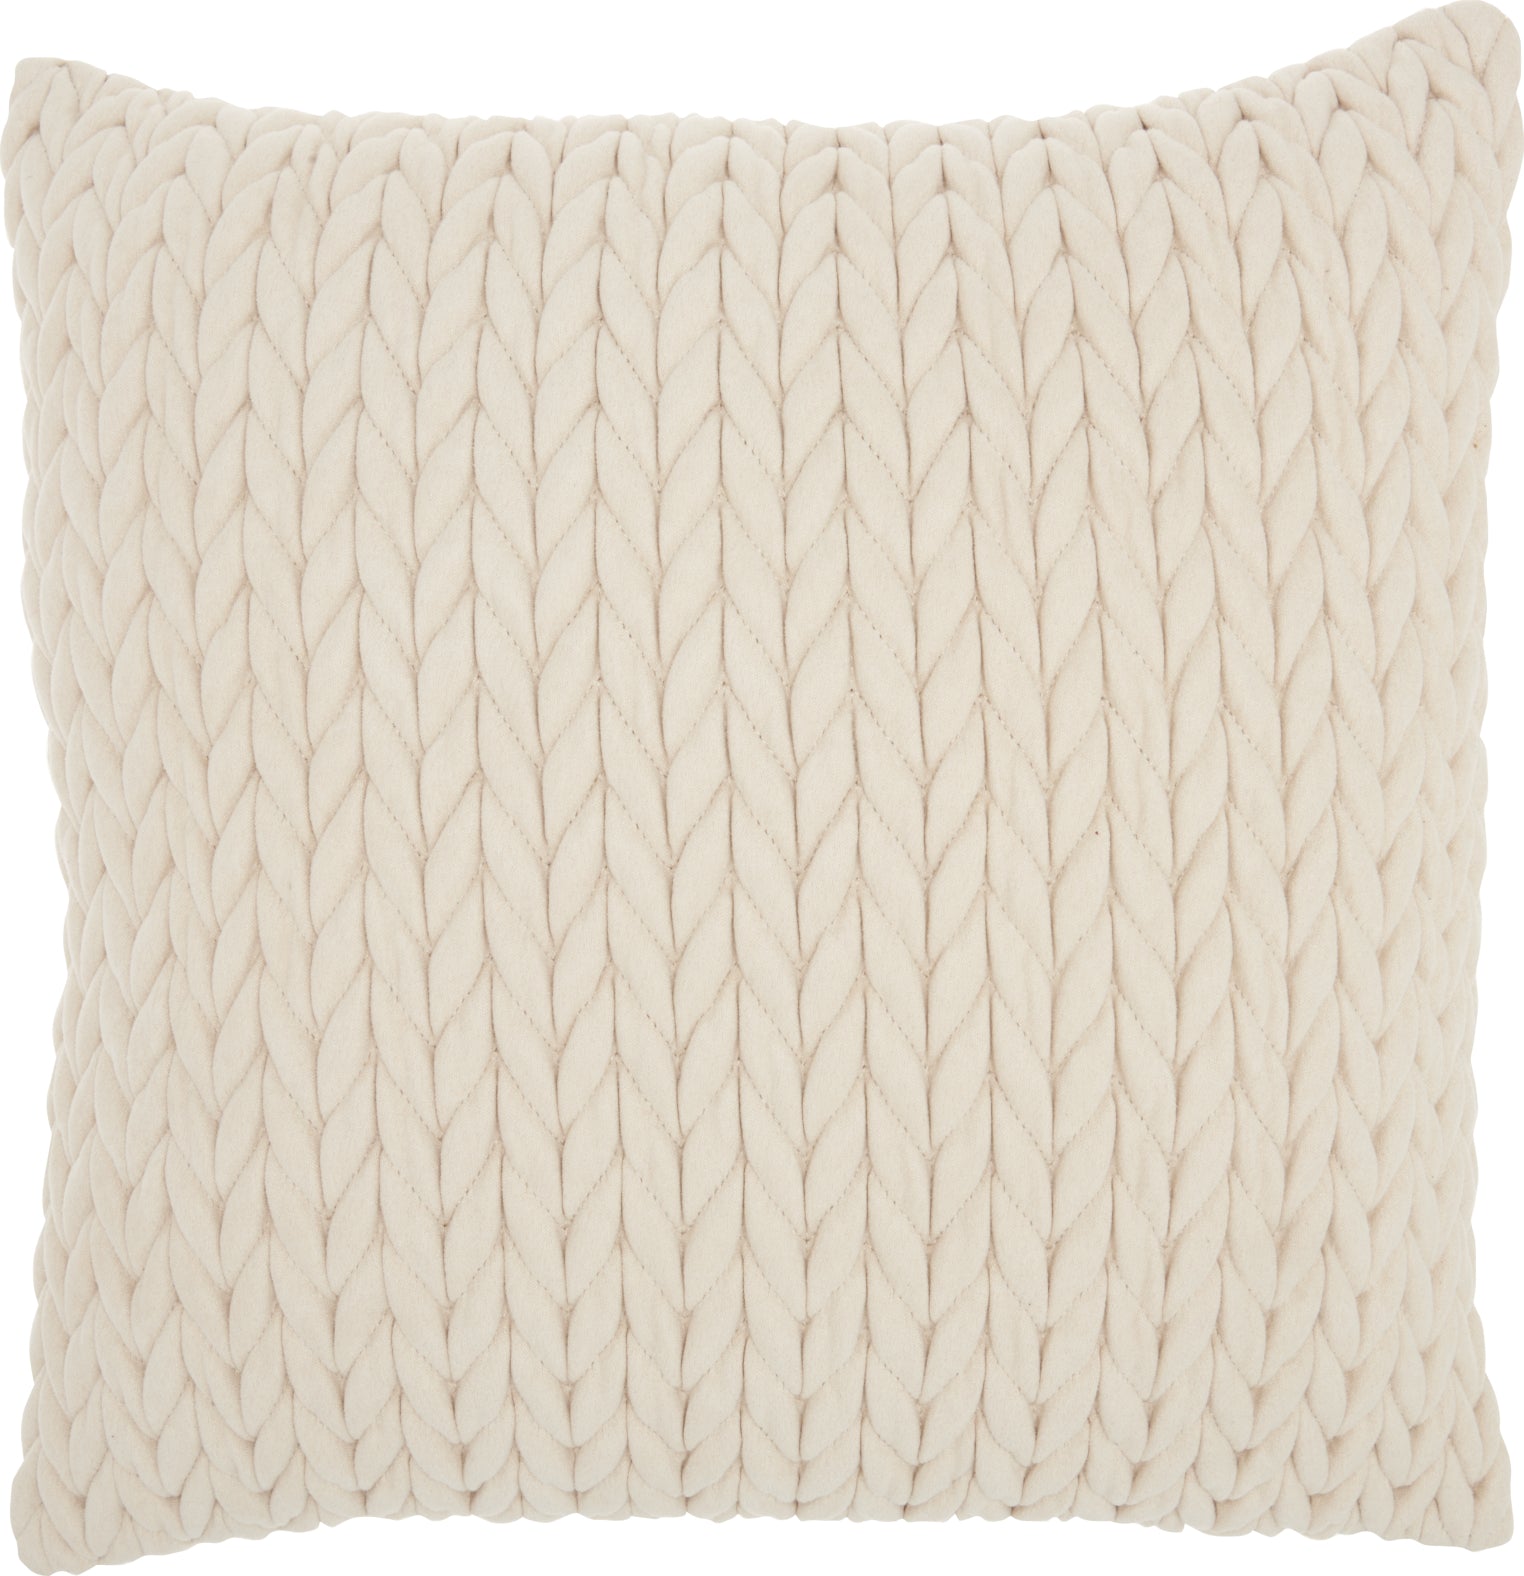 Nourison Life Styles Quilted Chevron Ivory by Mina Victory main image